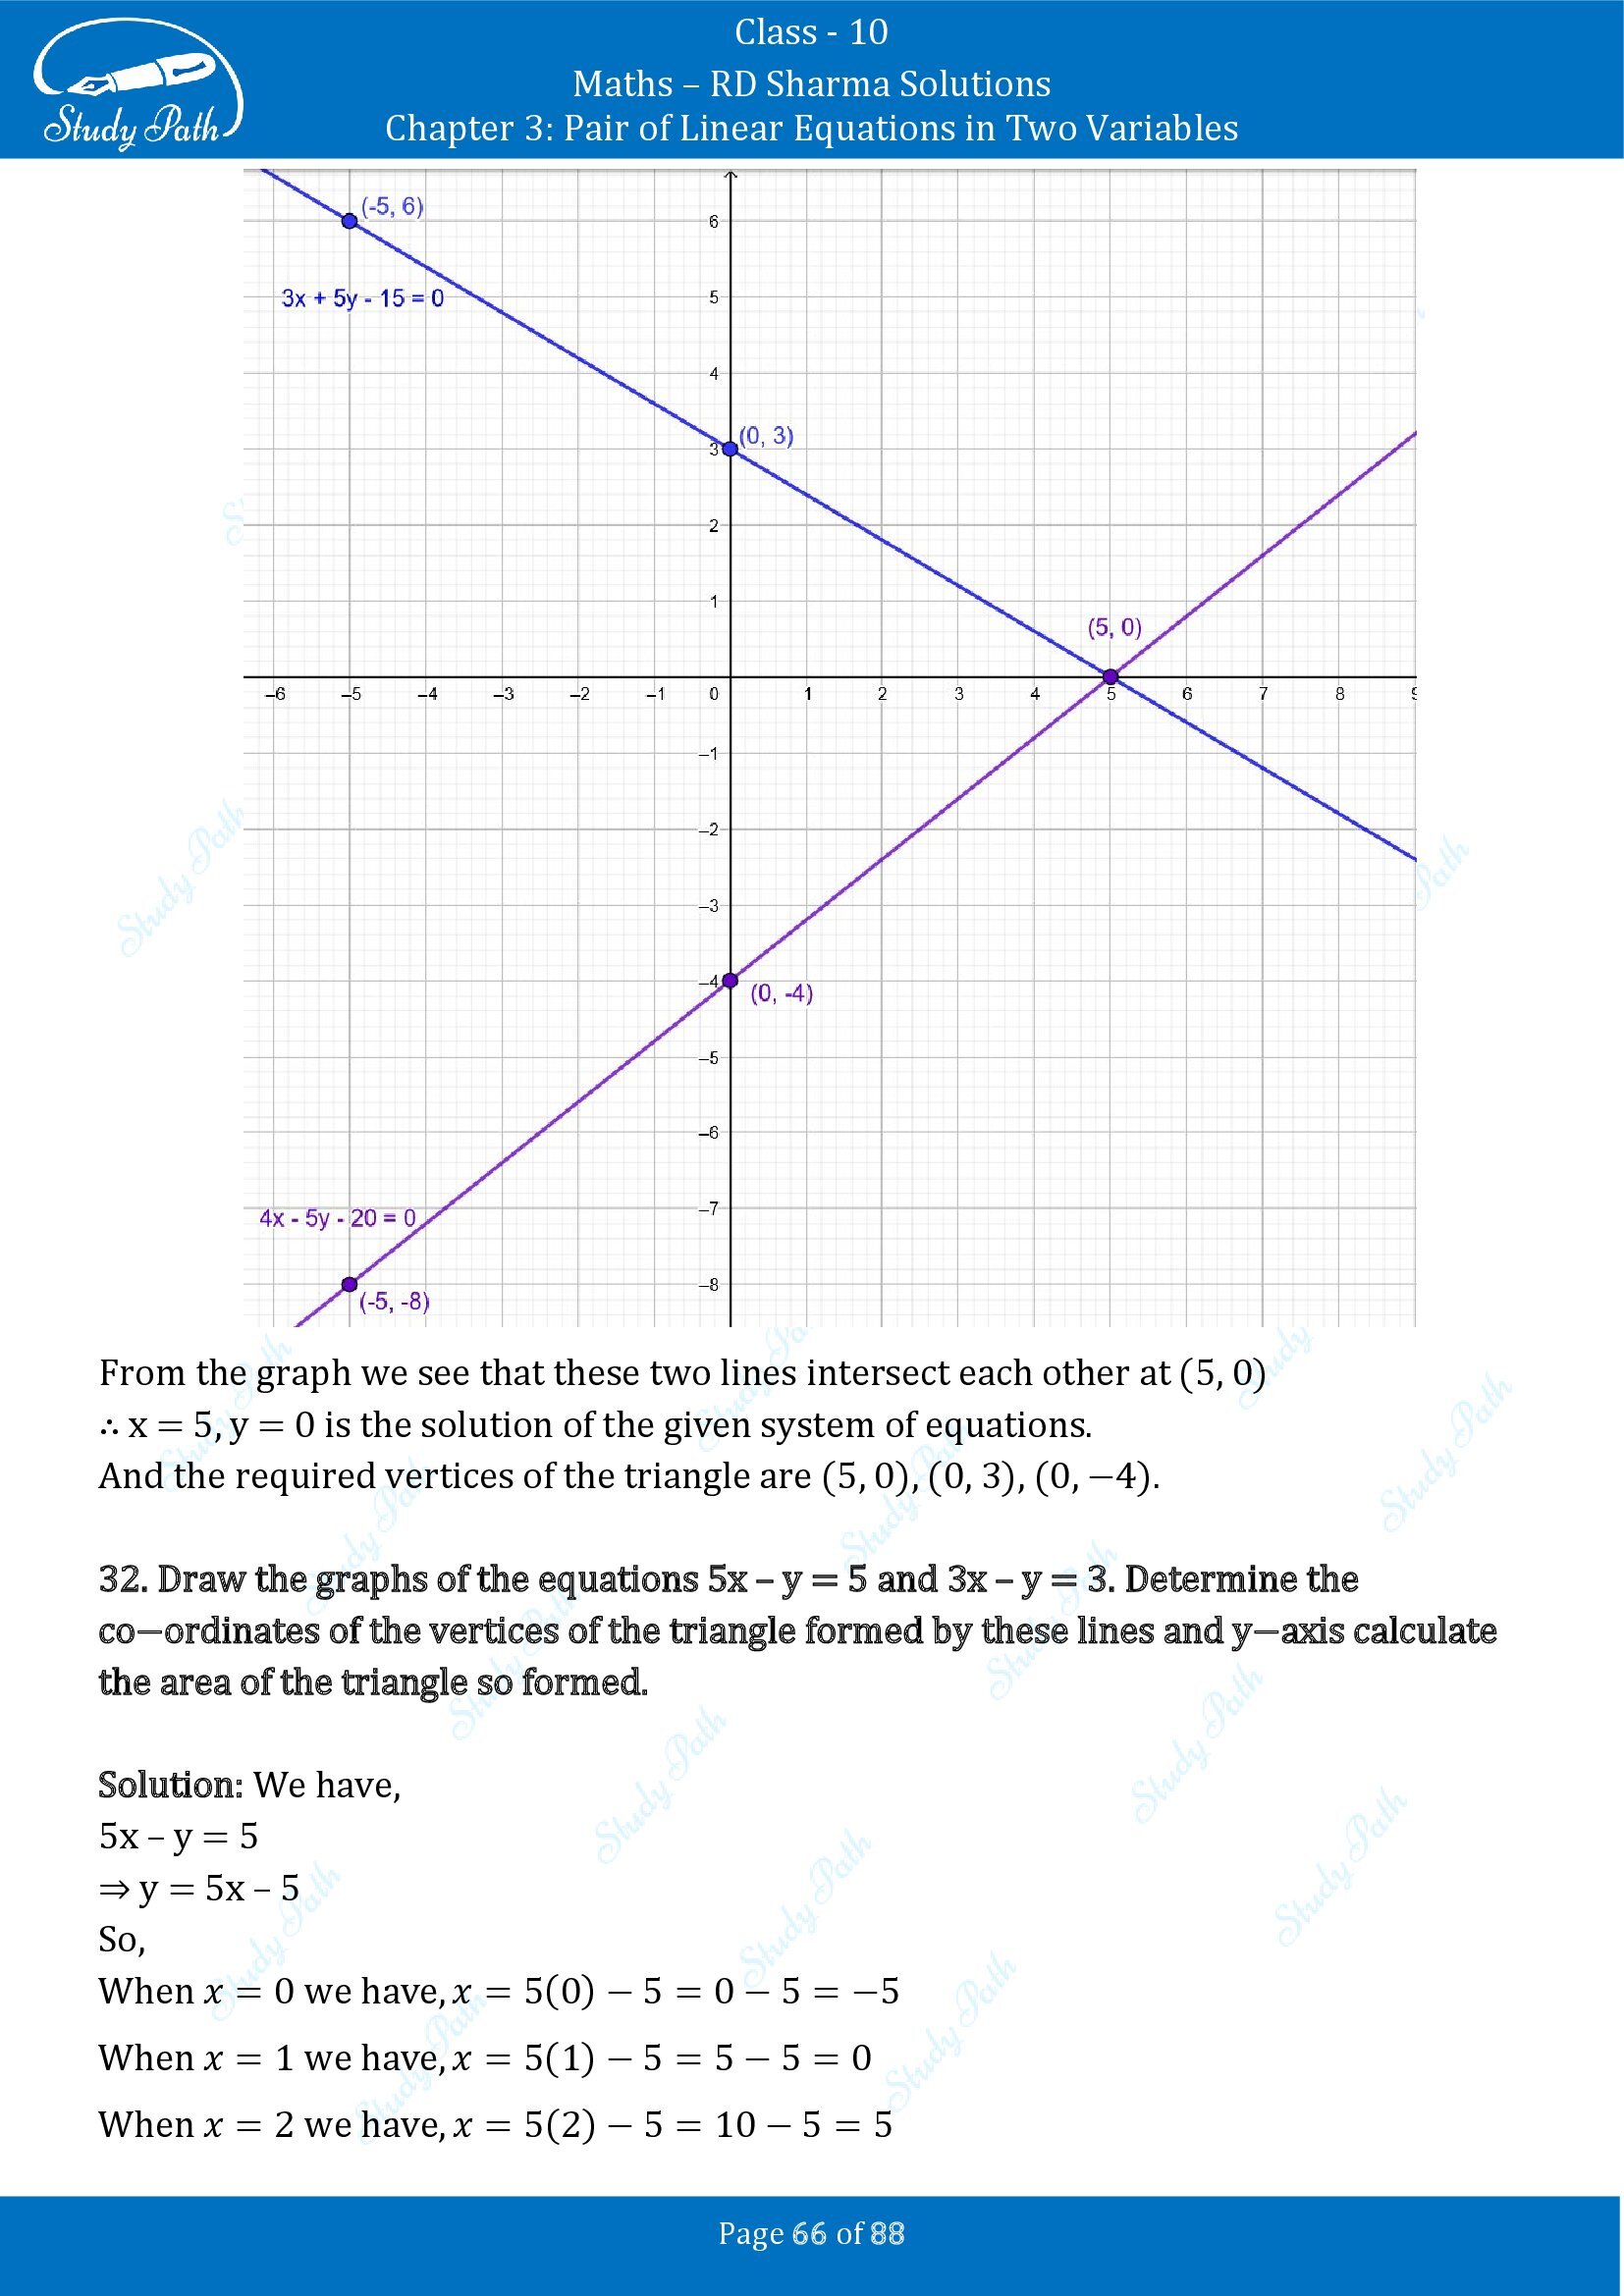 RD Sharma Solutions Class 10 Chapter 3 Pair of Linear Equations in Two Variables Exercise 3.2 00066